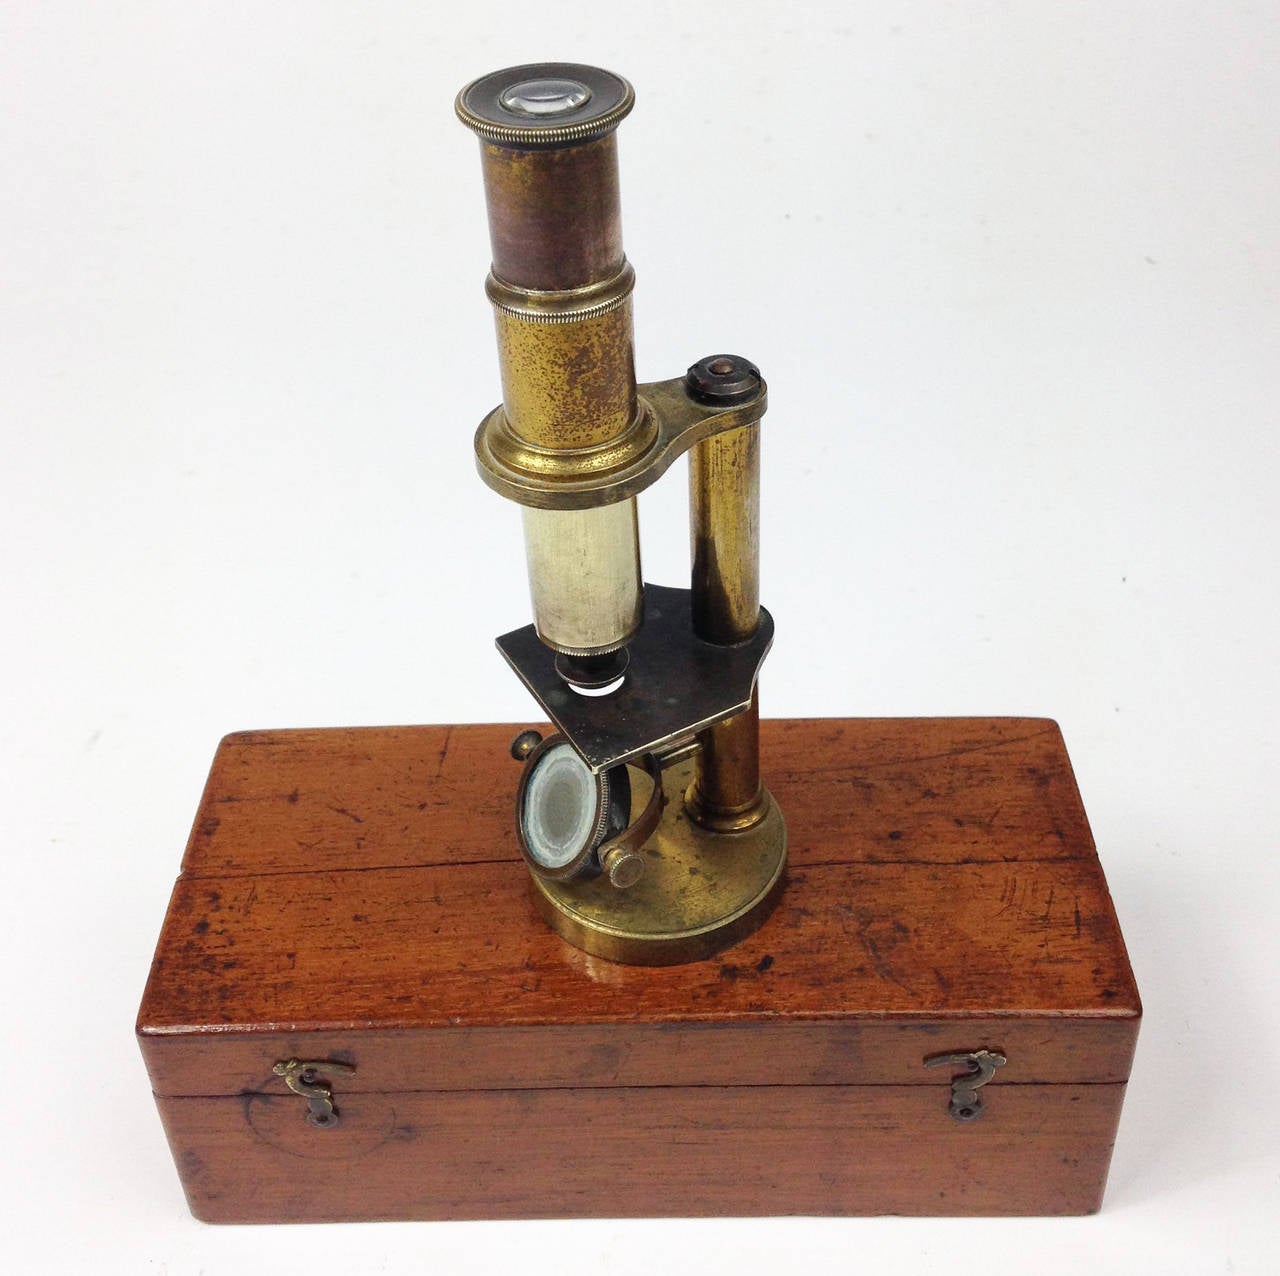 A lovely little gilt brass Victorian student microscope.

Housed within its original mahogany case.

A very decorative little item. Sizes stated are for the box.